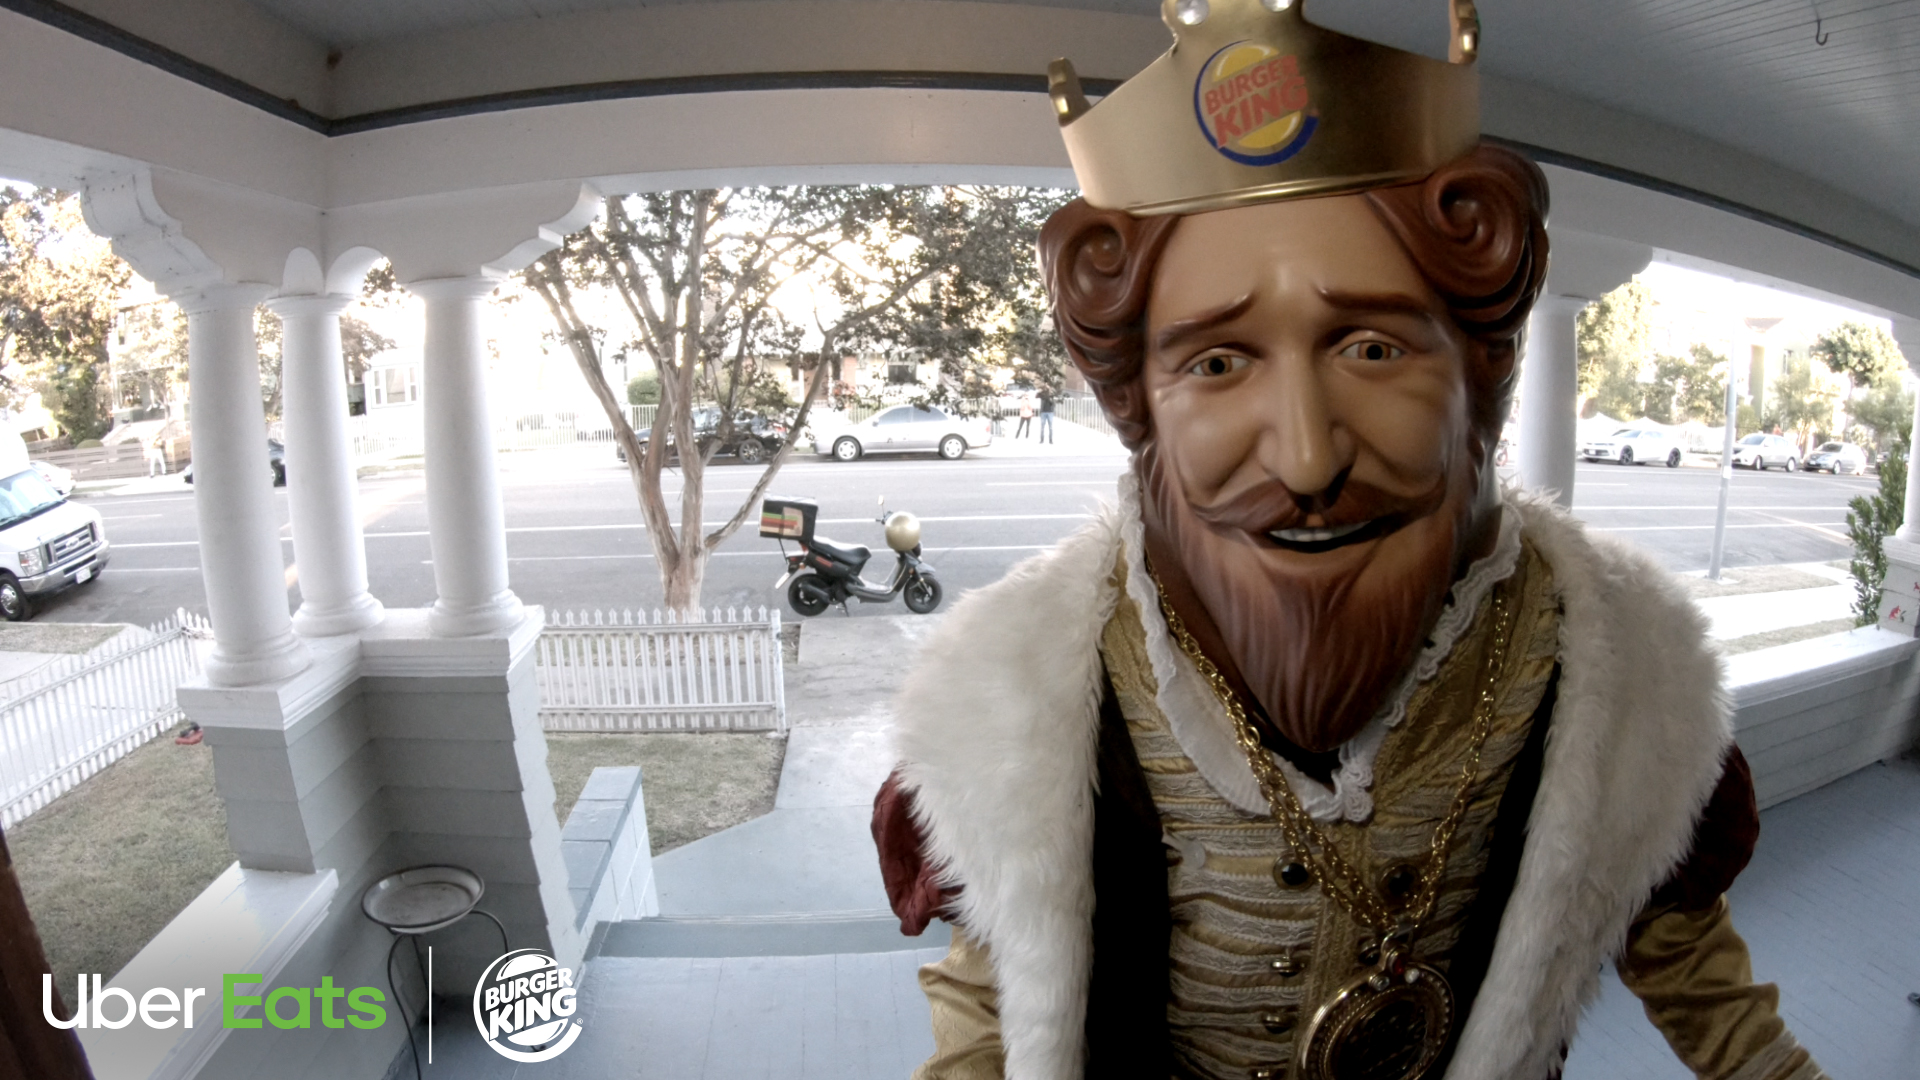 Burger King’s Mascot Hand-Delivers Food Through Uber Eats in this